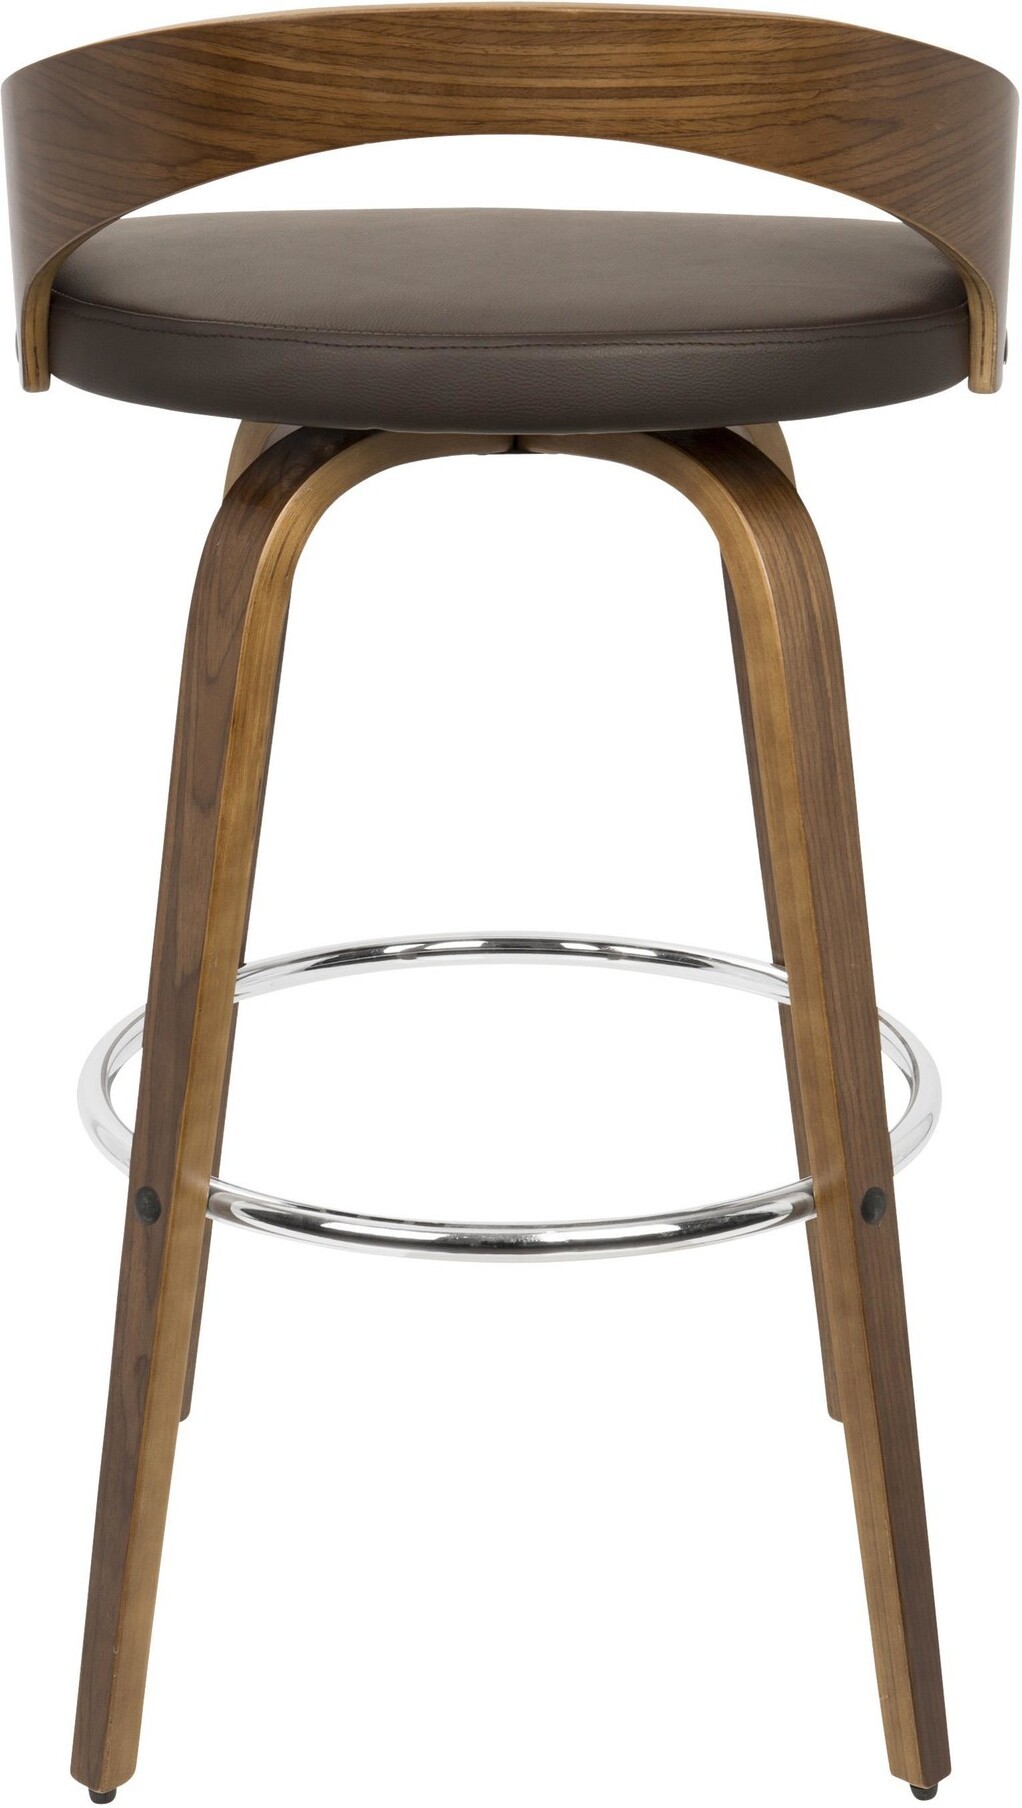 Grotto Modern Barstool With Swivel In, Grotto Bar Stool Walnut And Brown